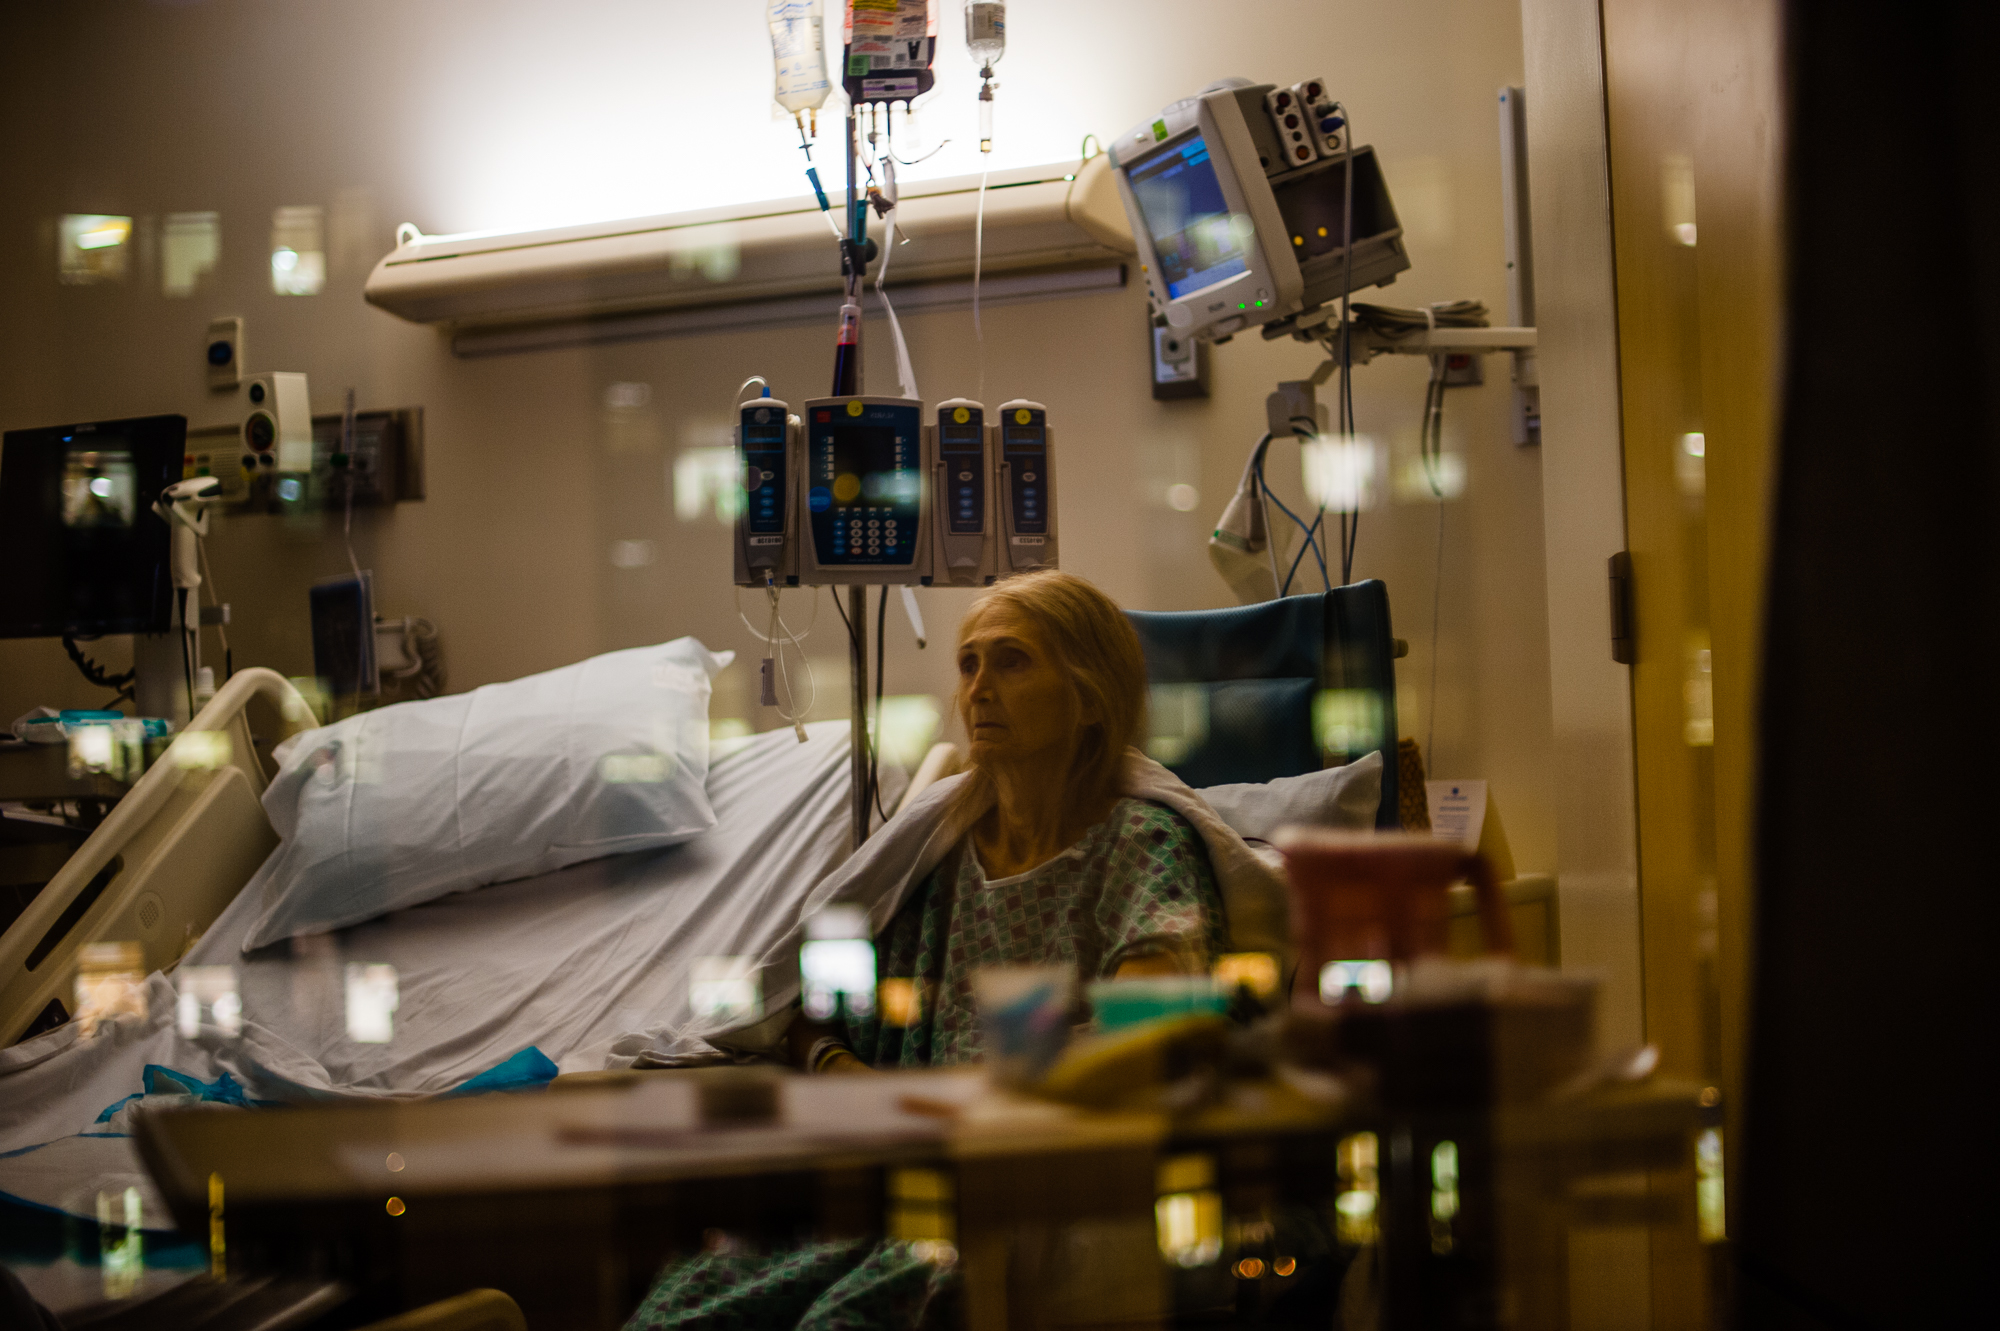  Rosie sits in a hospital room in Los Angeles at night.  